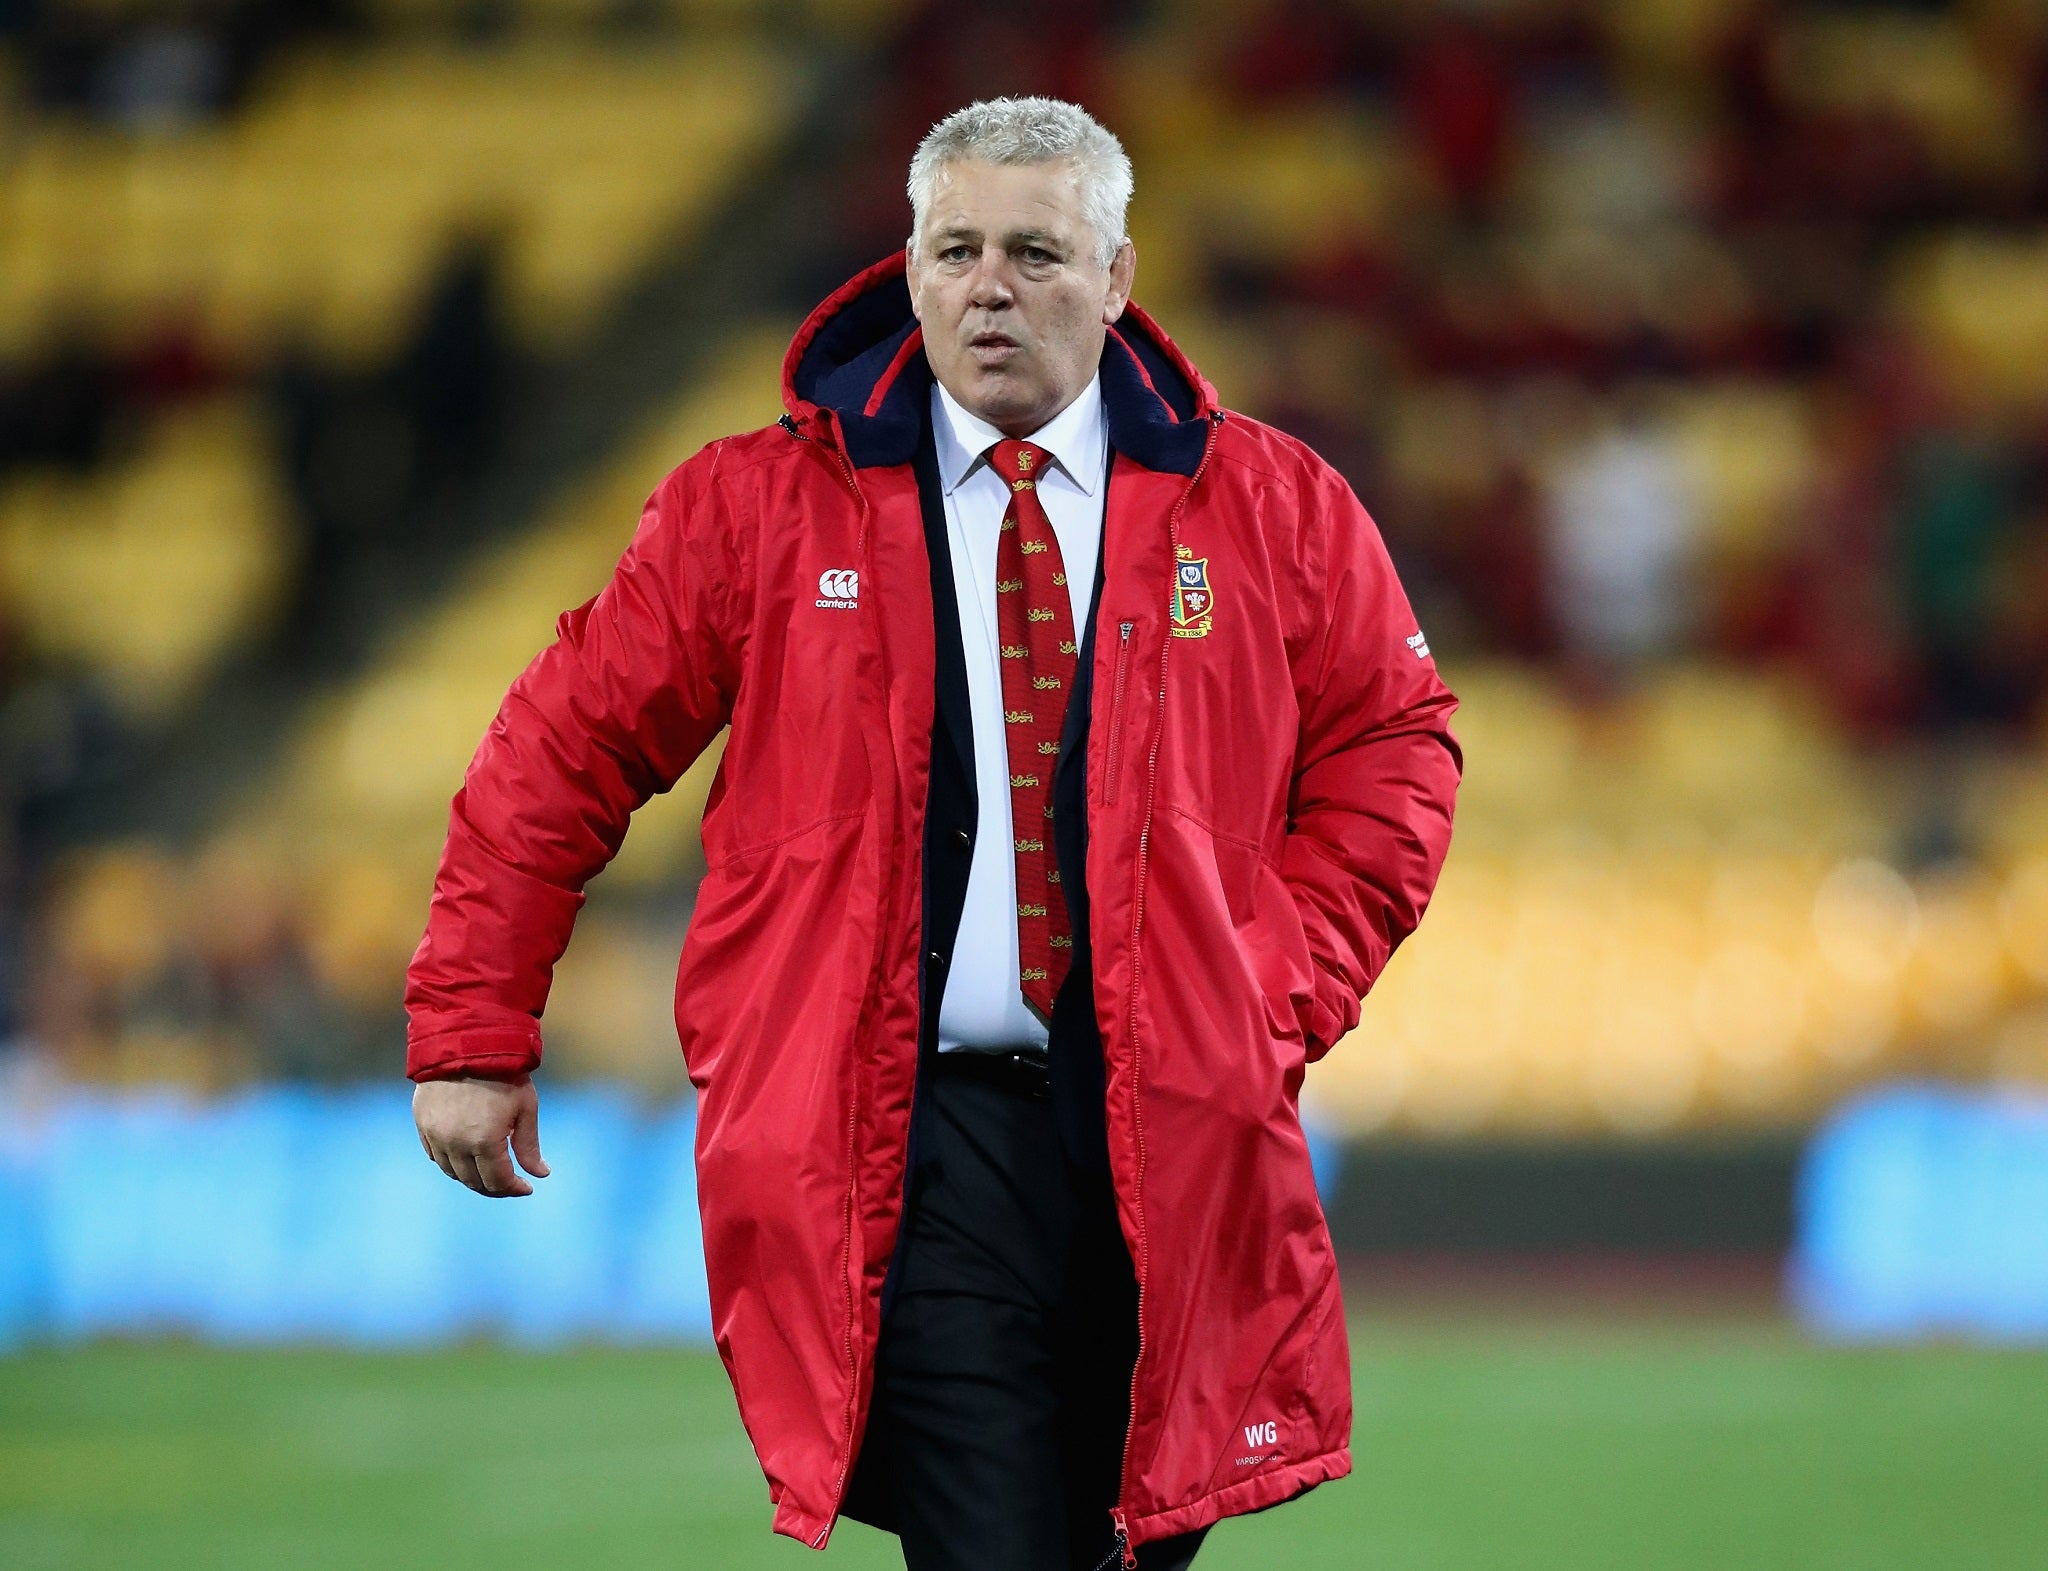 Warren Gatland's decisions appear to show signs of a man under pressure